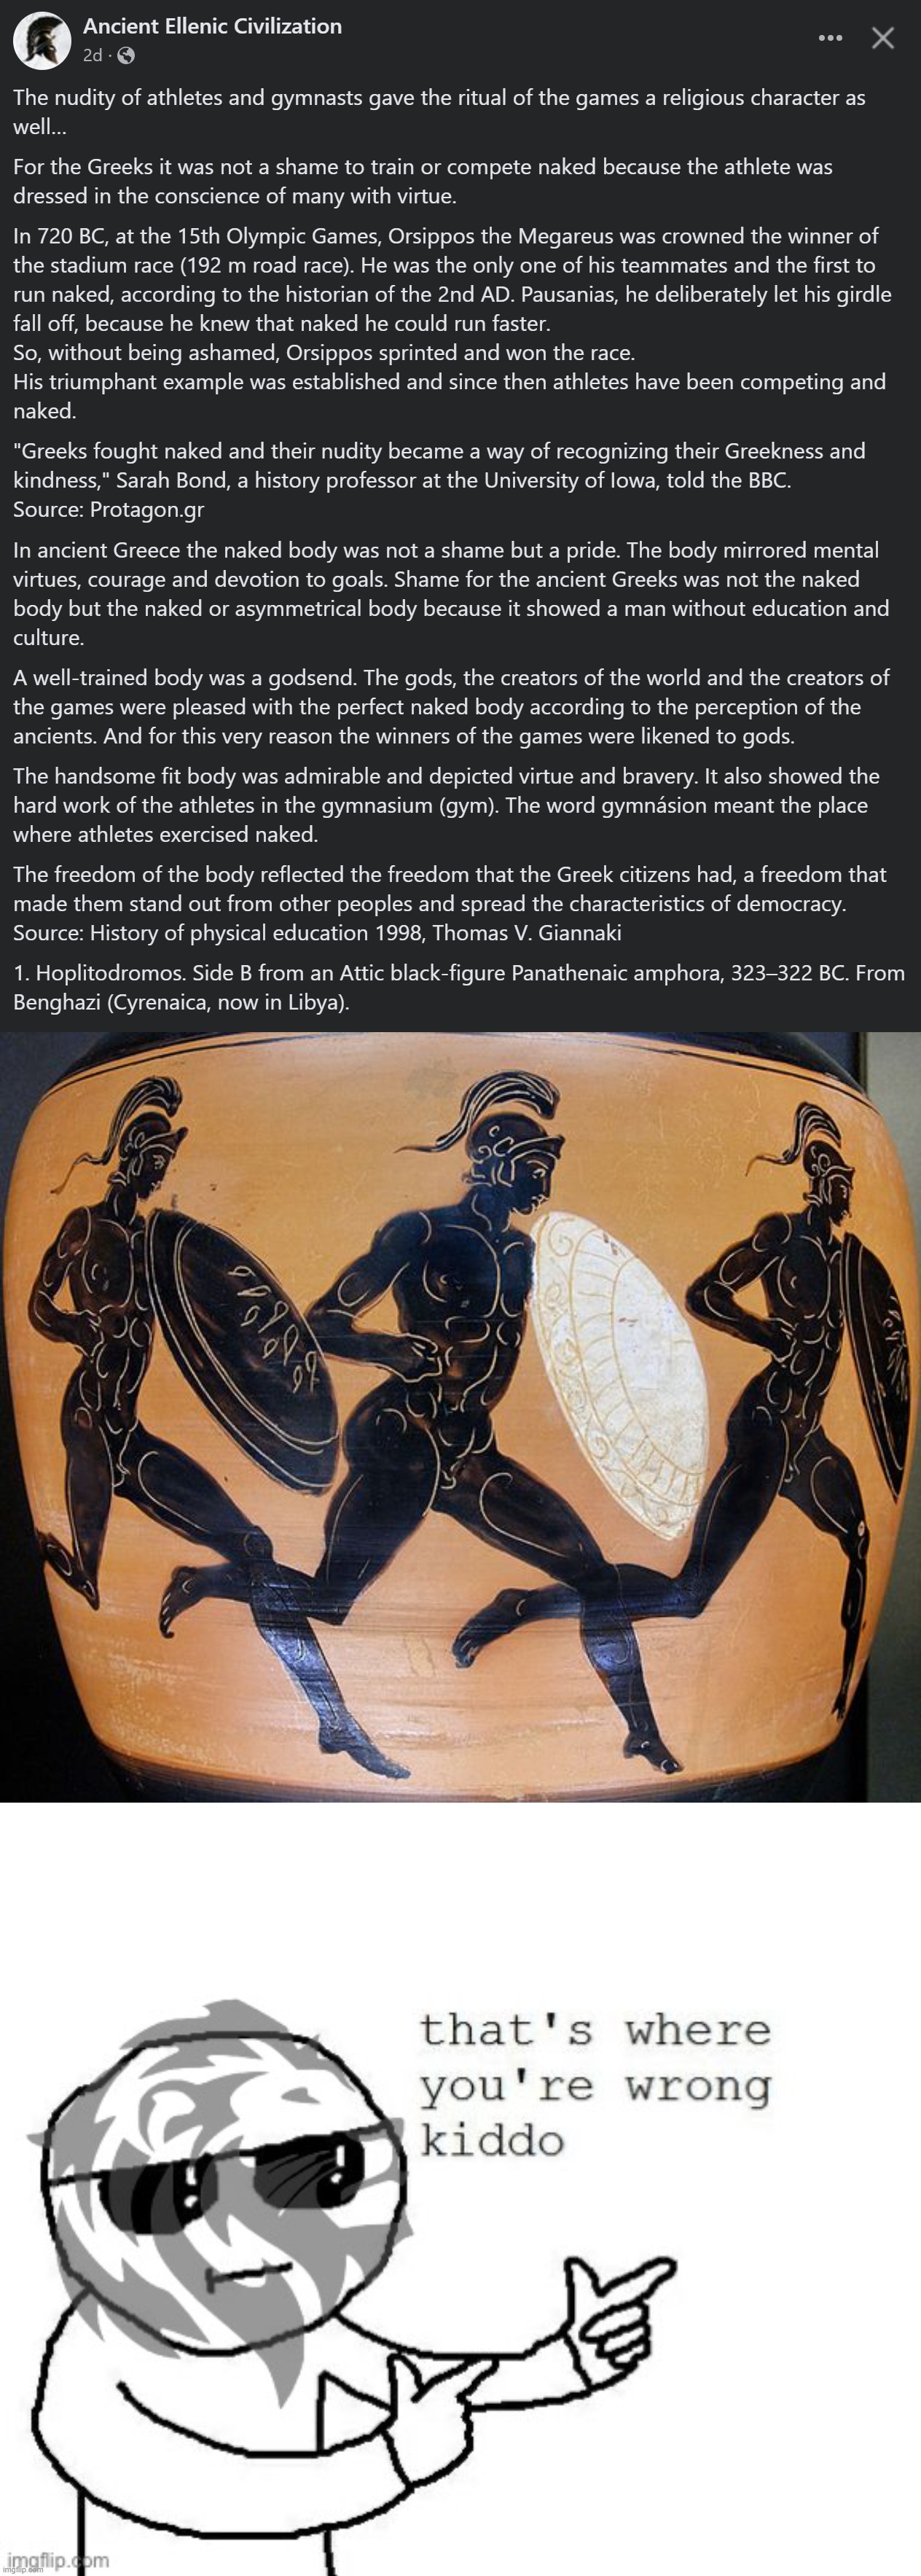 Yeah sure the ancient Greeks went naked for "reasons" but also homosexuality and pedophilia ran rampant back then. Coincidence? | image tagged in ancient greeks went naked,conservative party that s where you re wrong kiddo,reject,perversion,cover up,naked | made w/ Imgflip meme maker